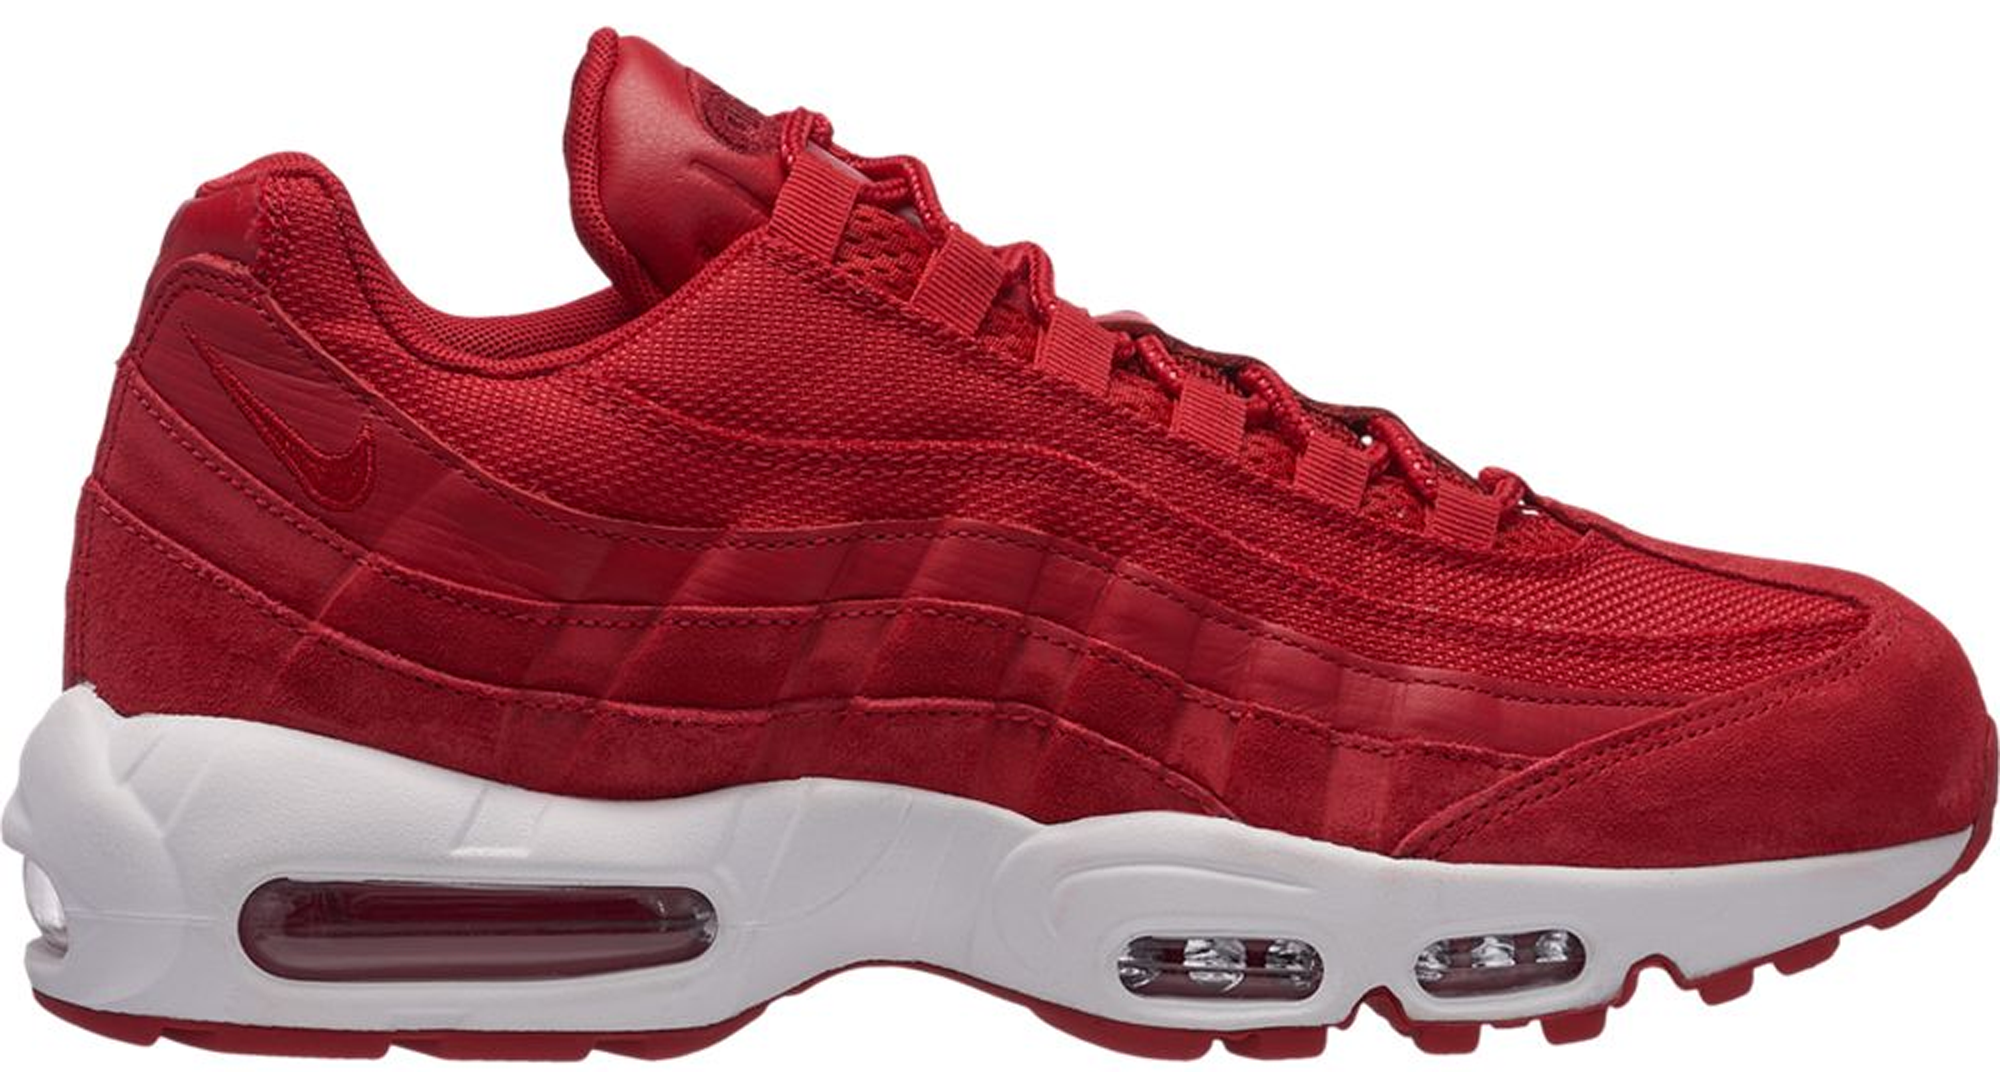 Nike Air Max 95 Gym Red Team Red 